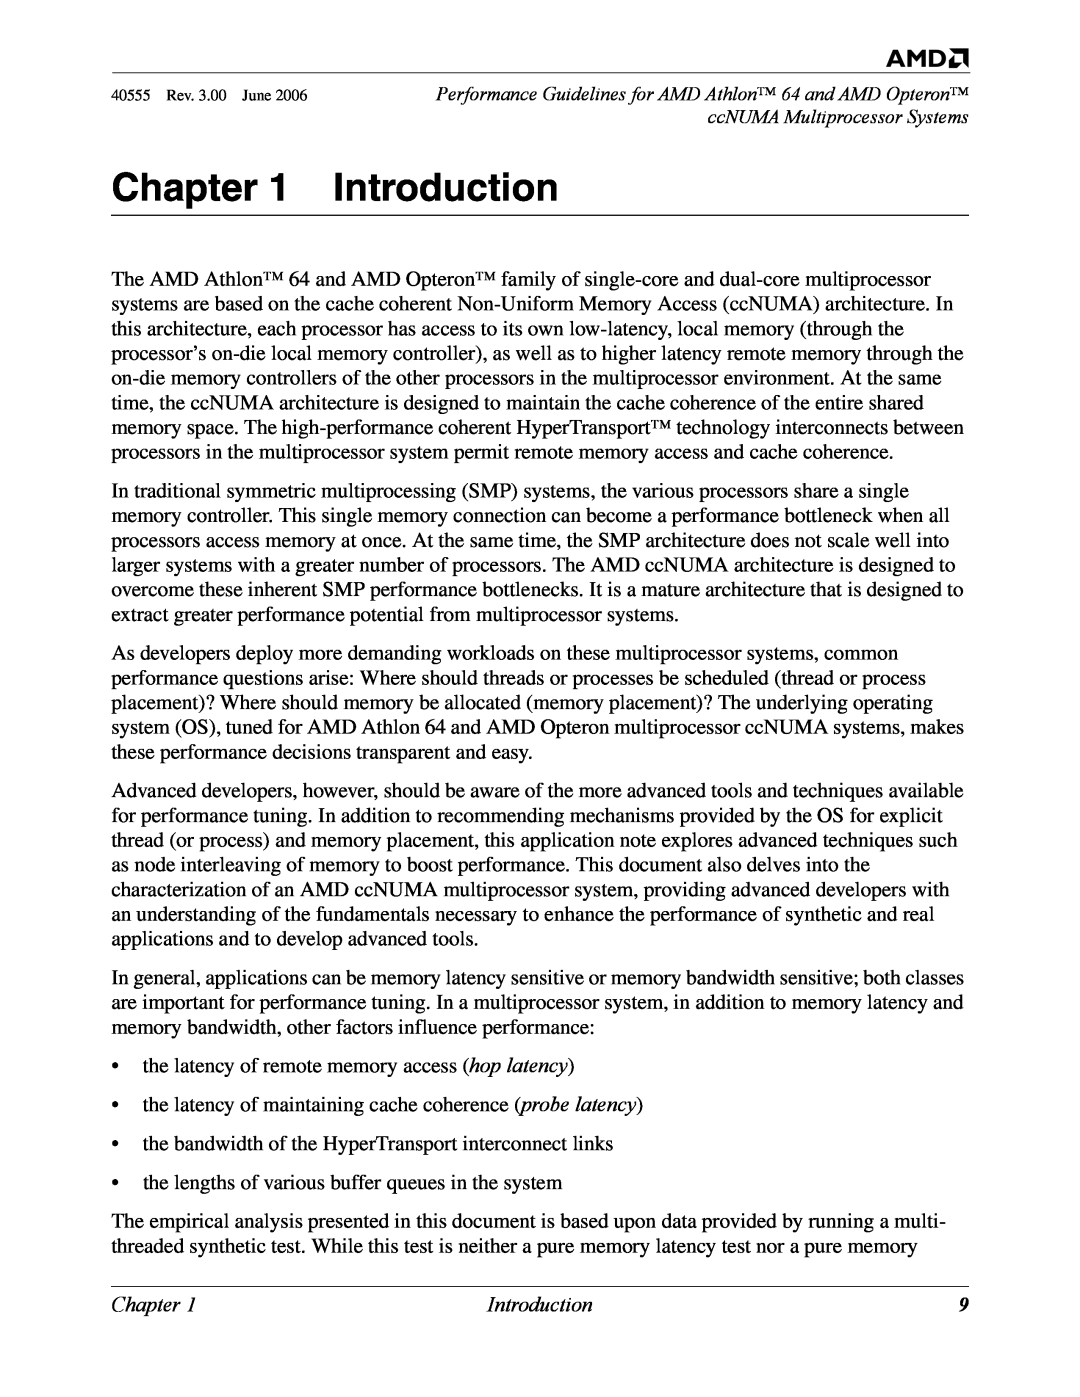 AMD 64 manual Introduction, Chapter 